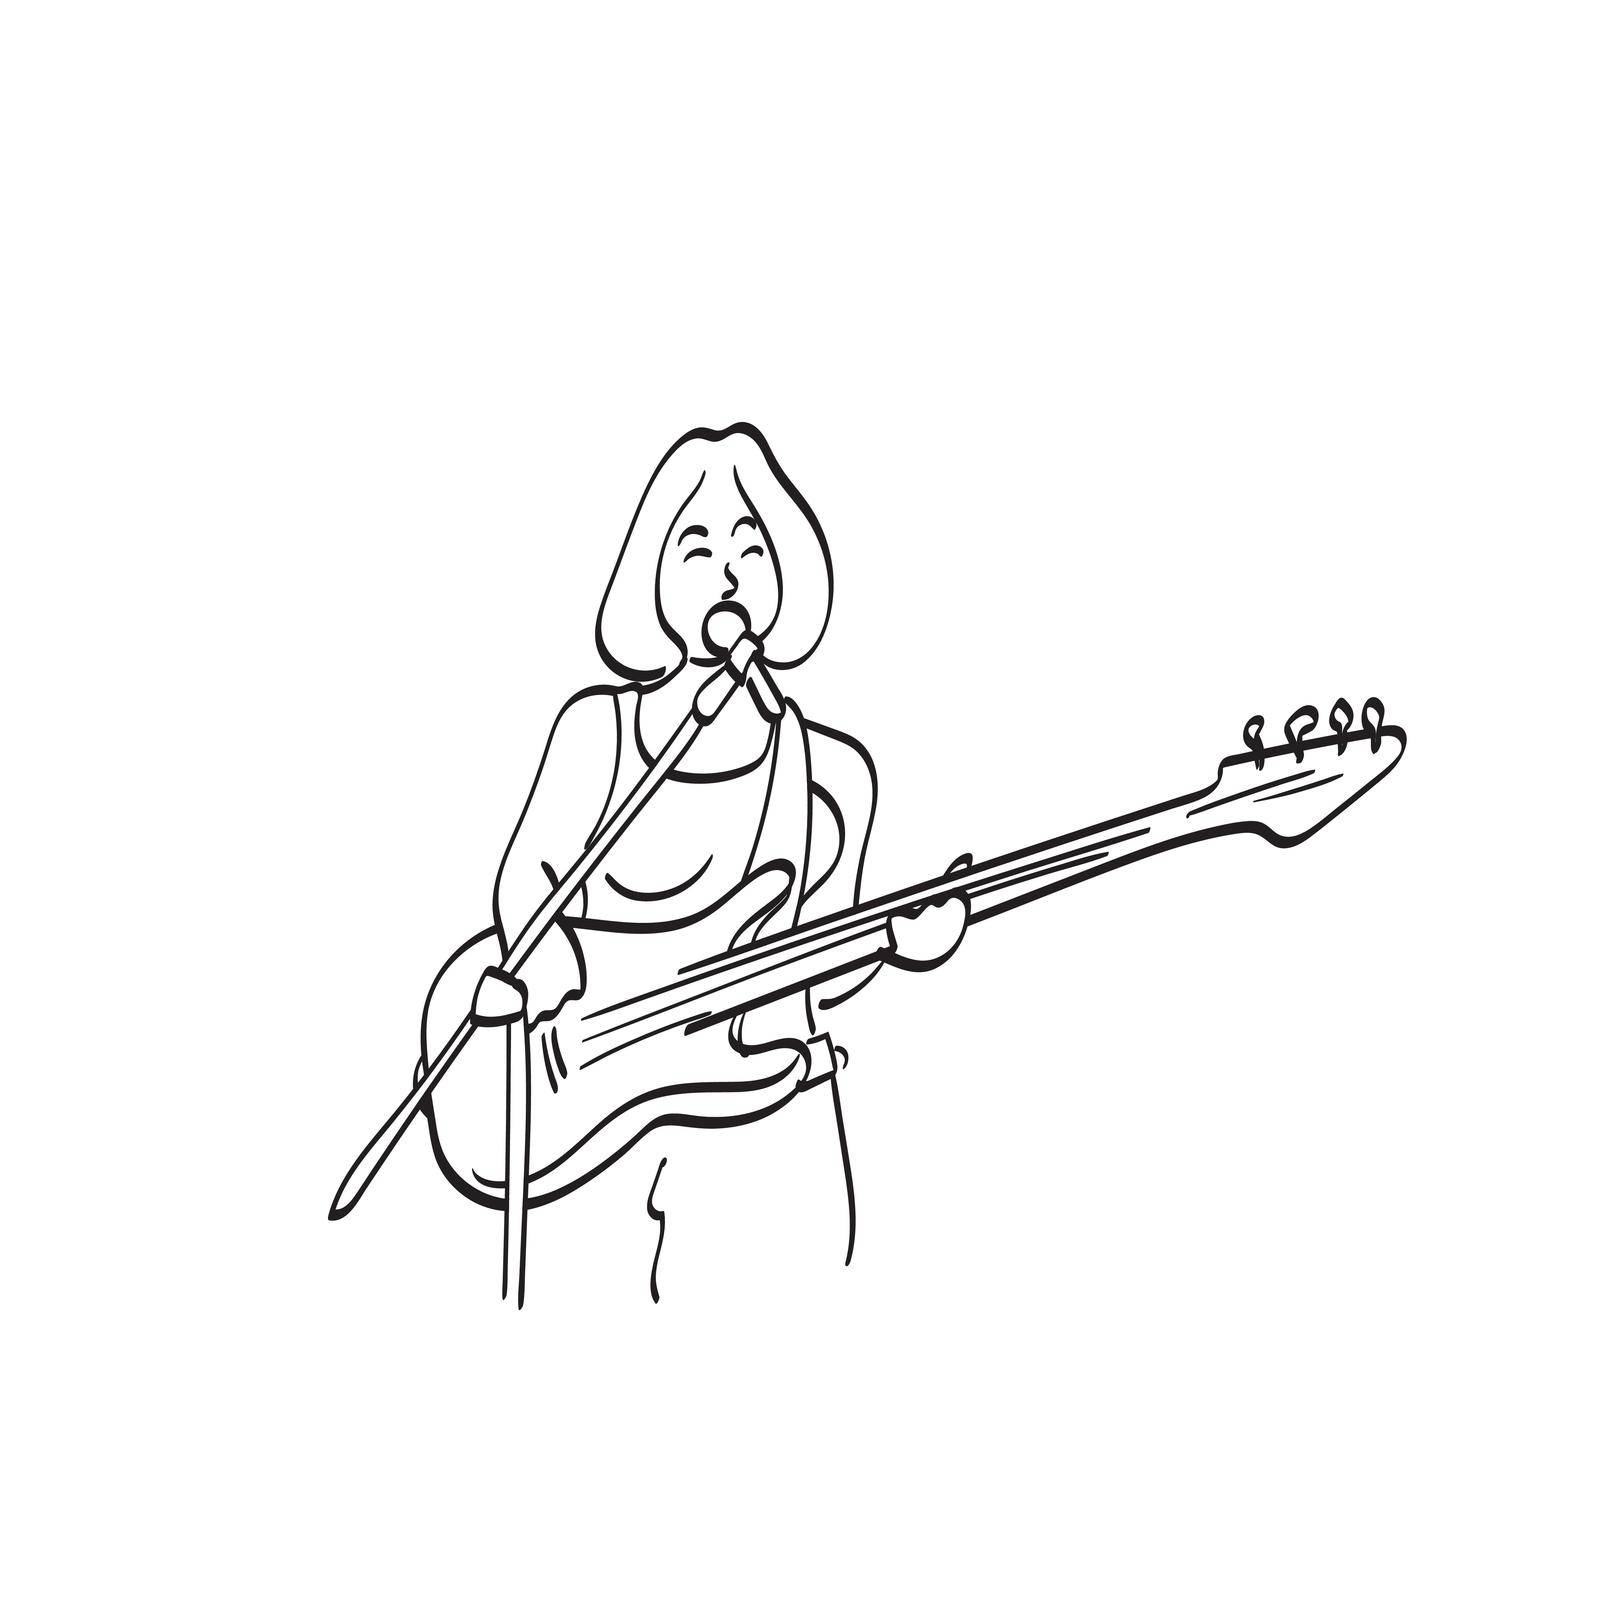 female singer with electric bass guitar and microphone illustration vector hand drawn isolated on white background line art. by tidarattj